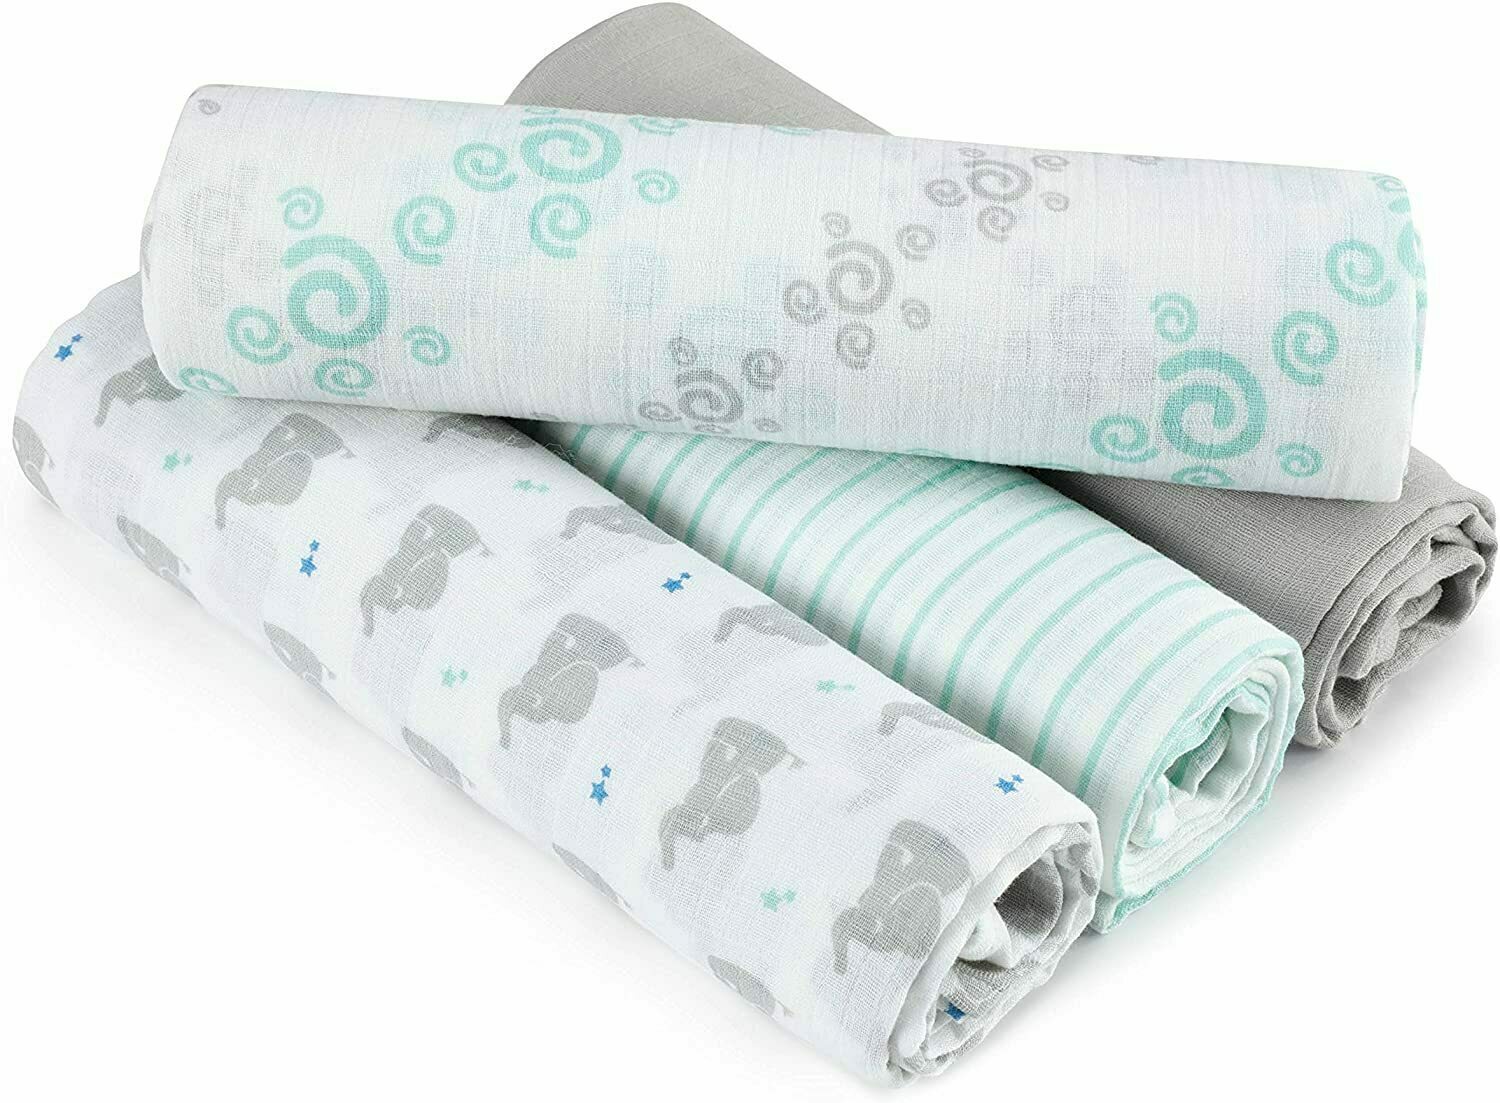 Aden and Anais Cotton Muslin Swaddle Blanket